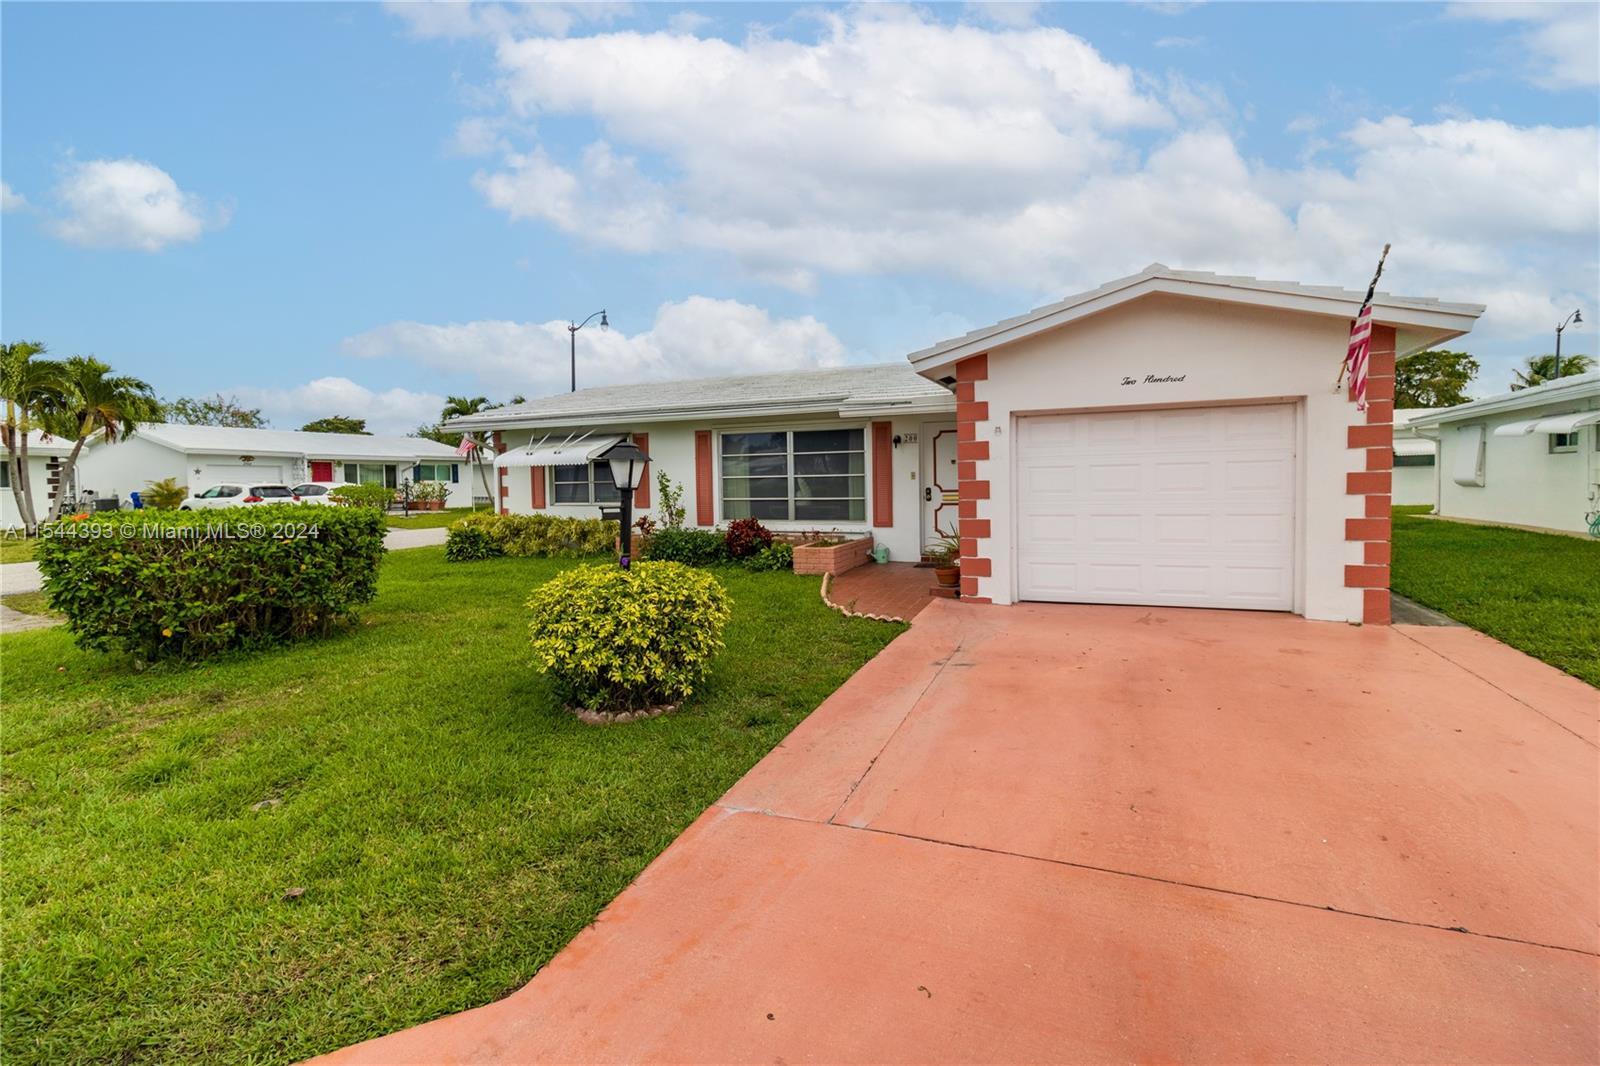 LOVELY 2-bedroom, 2-bath single-family home with garage in a private 55 + golf Leisureville Communit